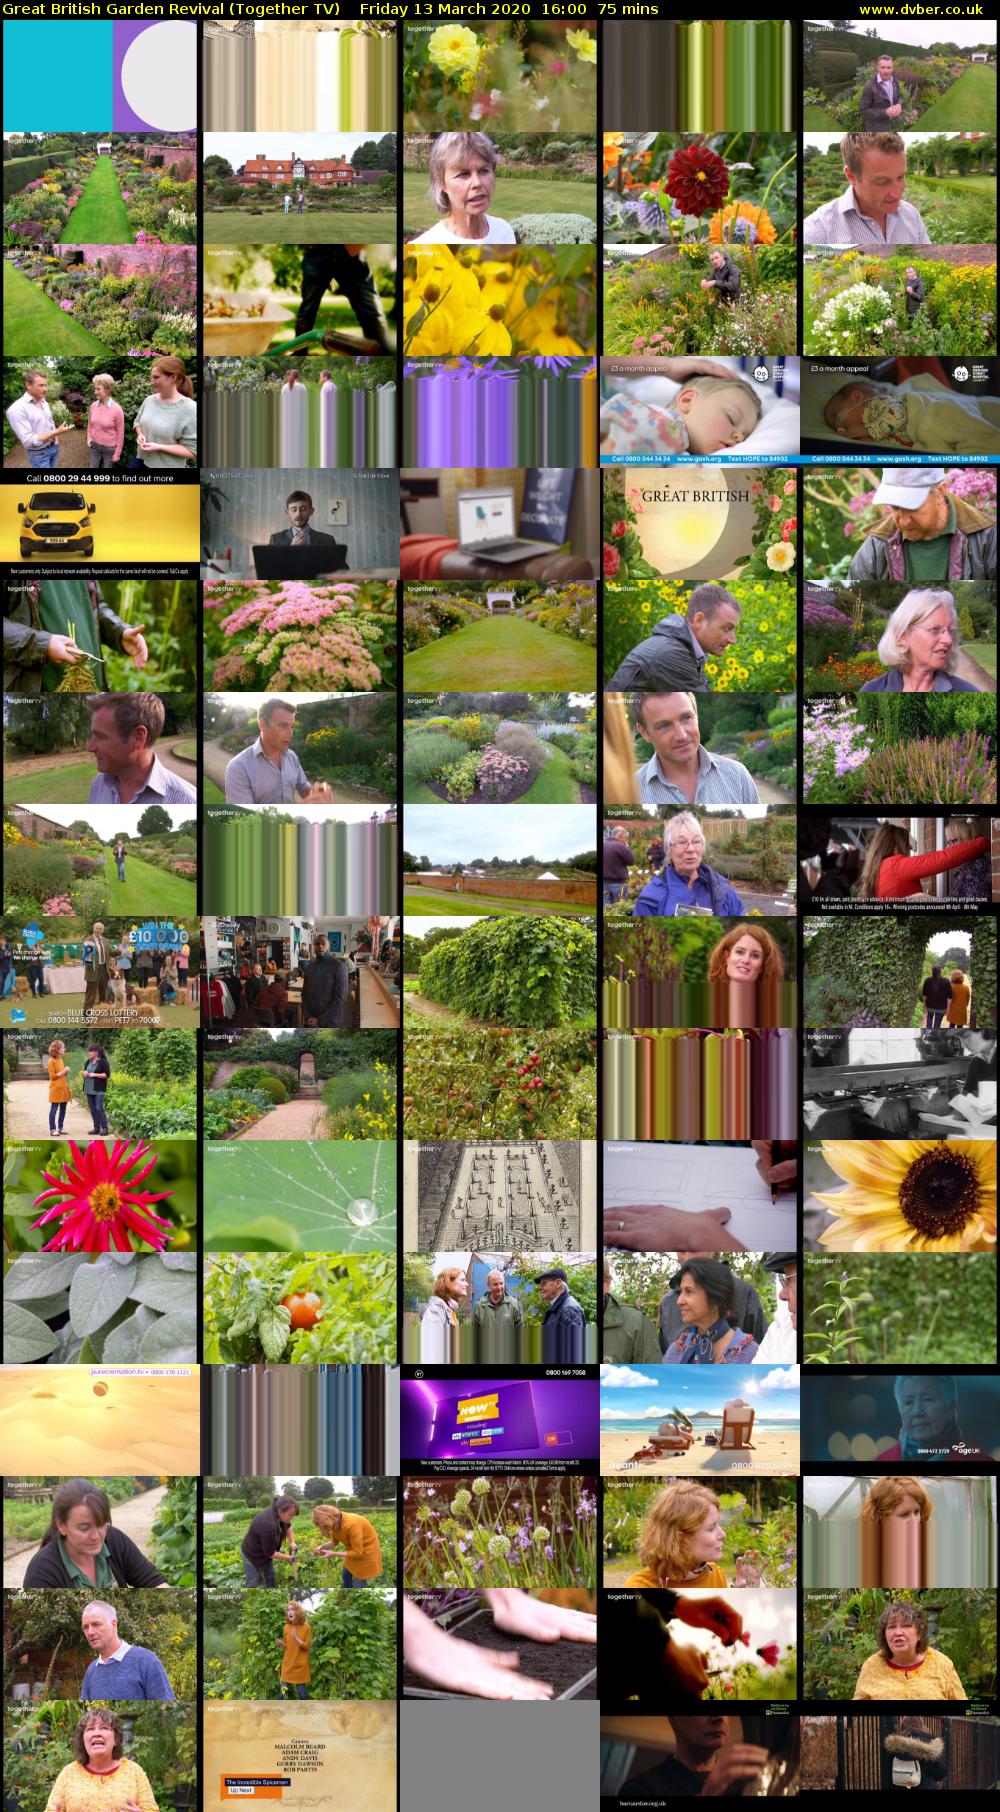 Great British Garden Revival (Together TV) Friday 13 March 2020 16:00 - 17:15